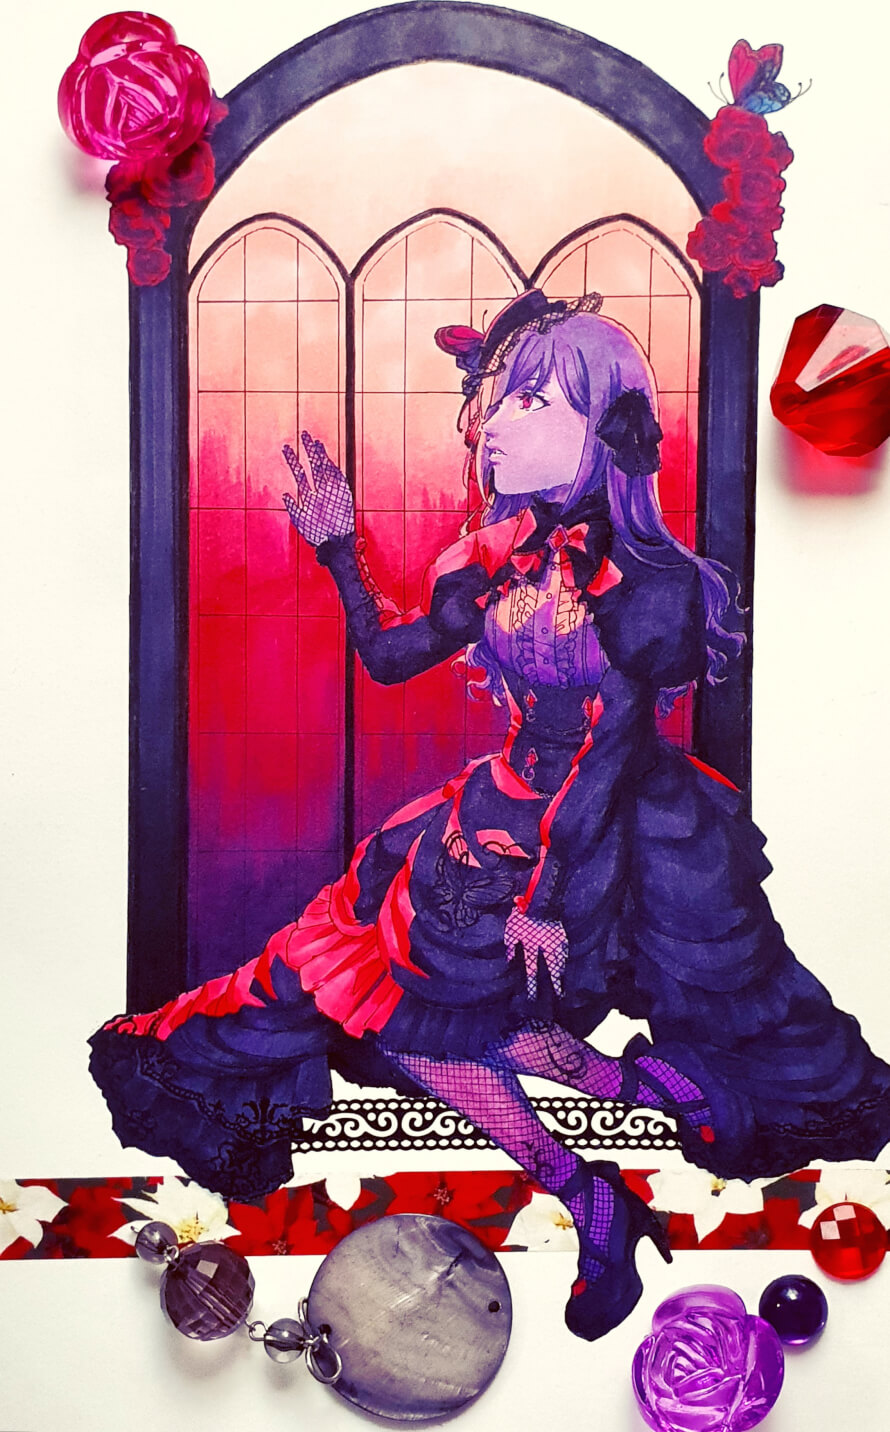 limited ranko fanart, another inktober entry! you can see more shots of the piece in either of the...